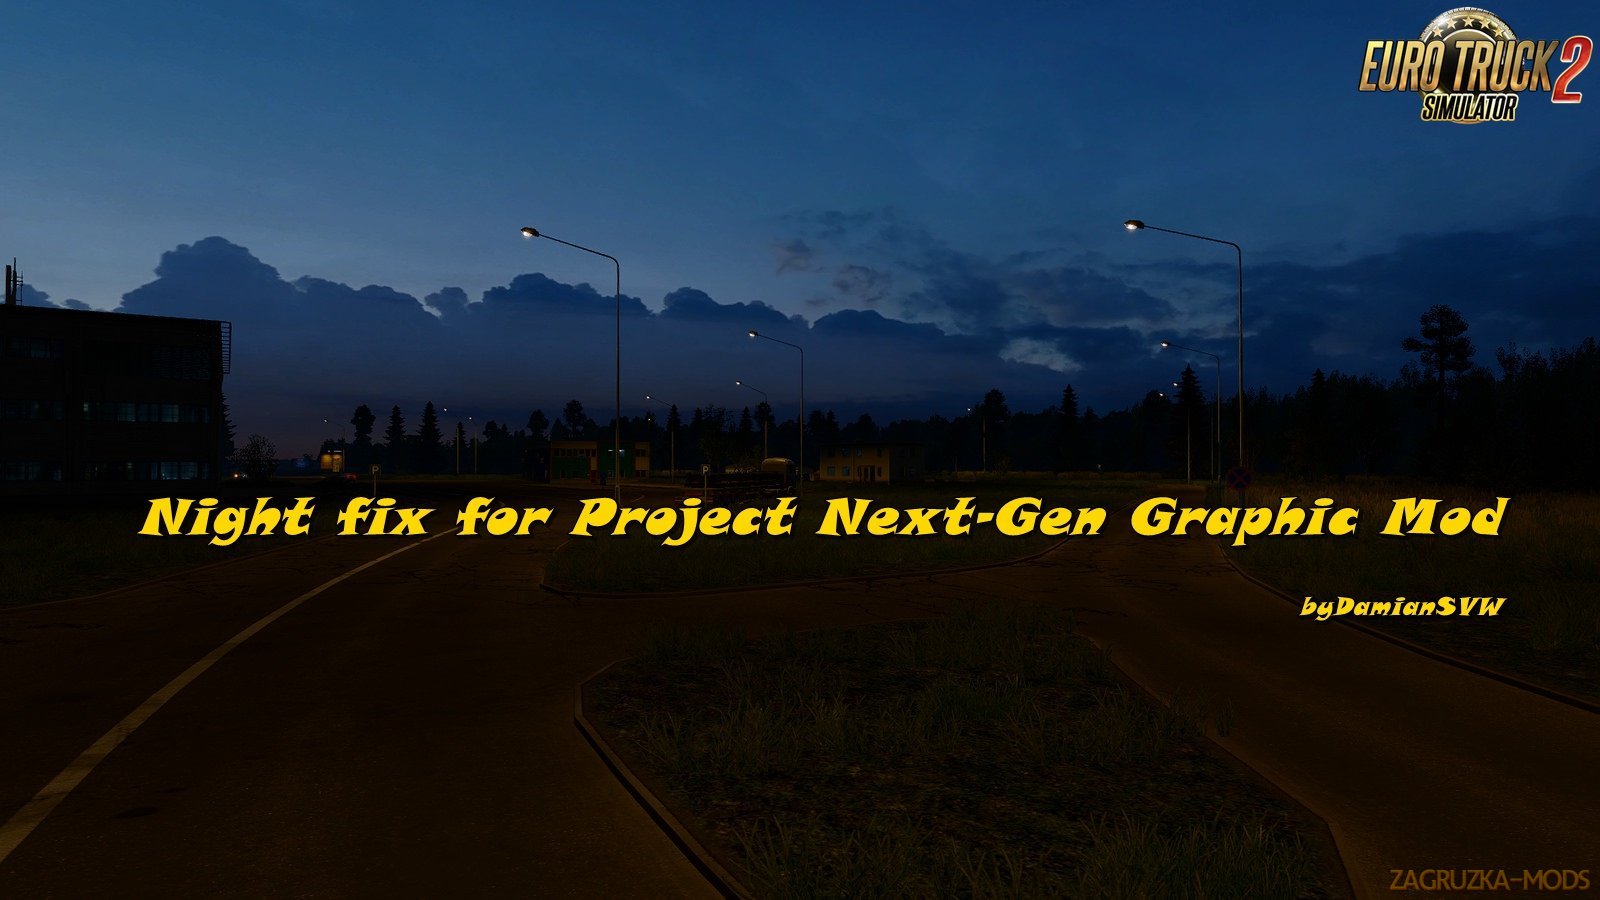 Night fix for Project Next-Gen Graphic Mod byDamianSVW